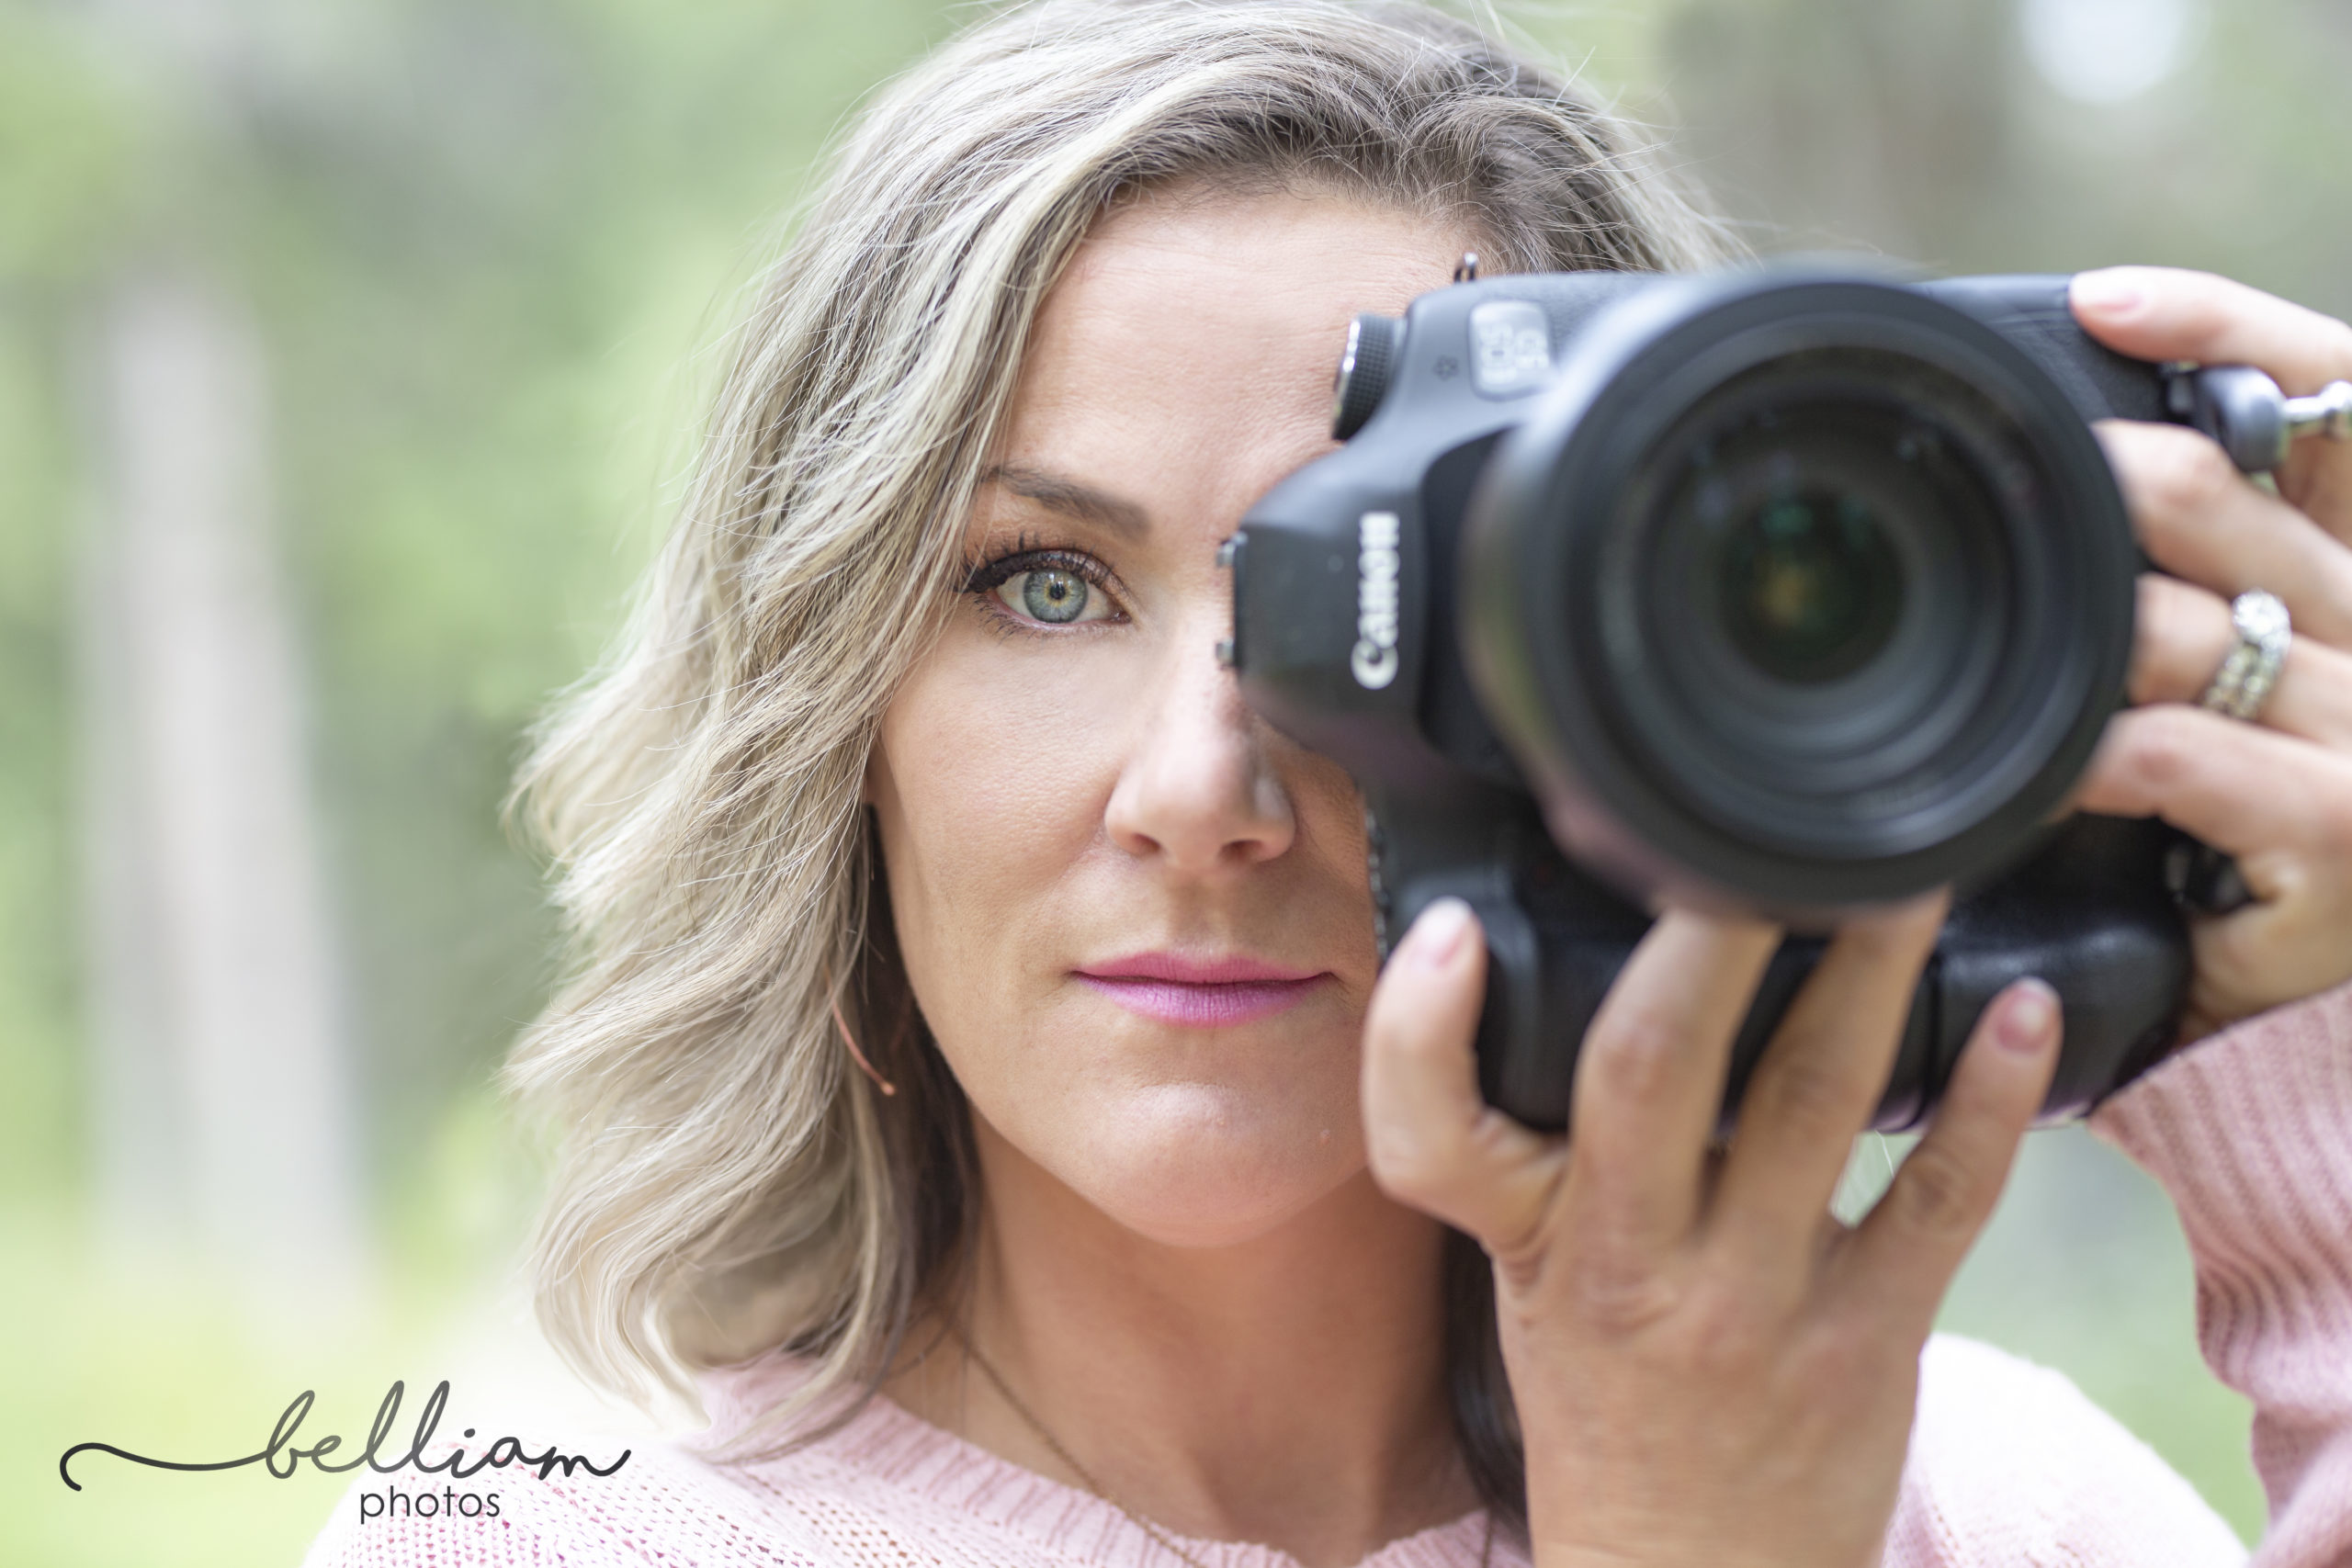 Blonde photographer wendy goetz holding camera up to her face close up photo